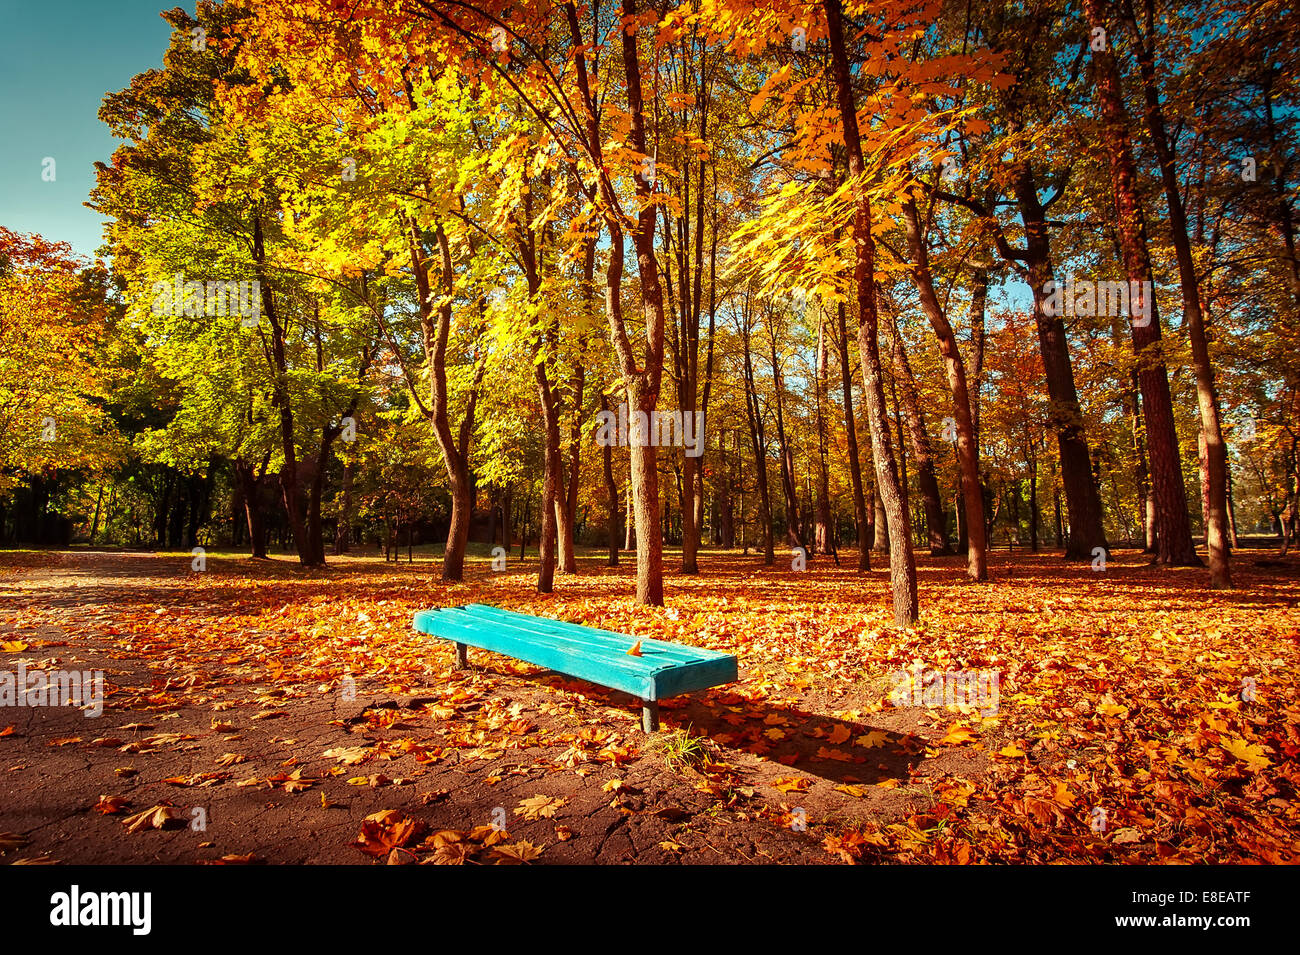 Sunny day in outdoor park with colorful autumn trees and bench. Amazing bright colors of autumn nature landscape Stock Photo